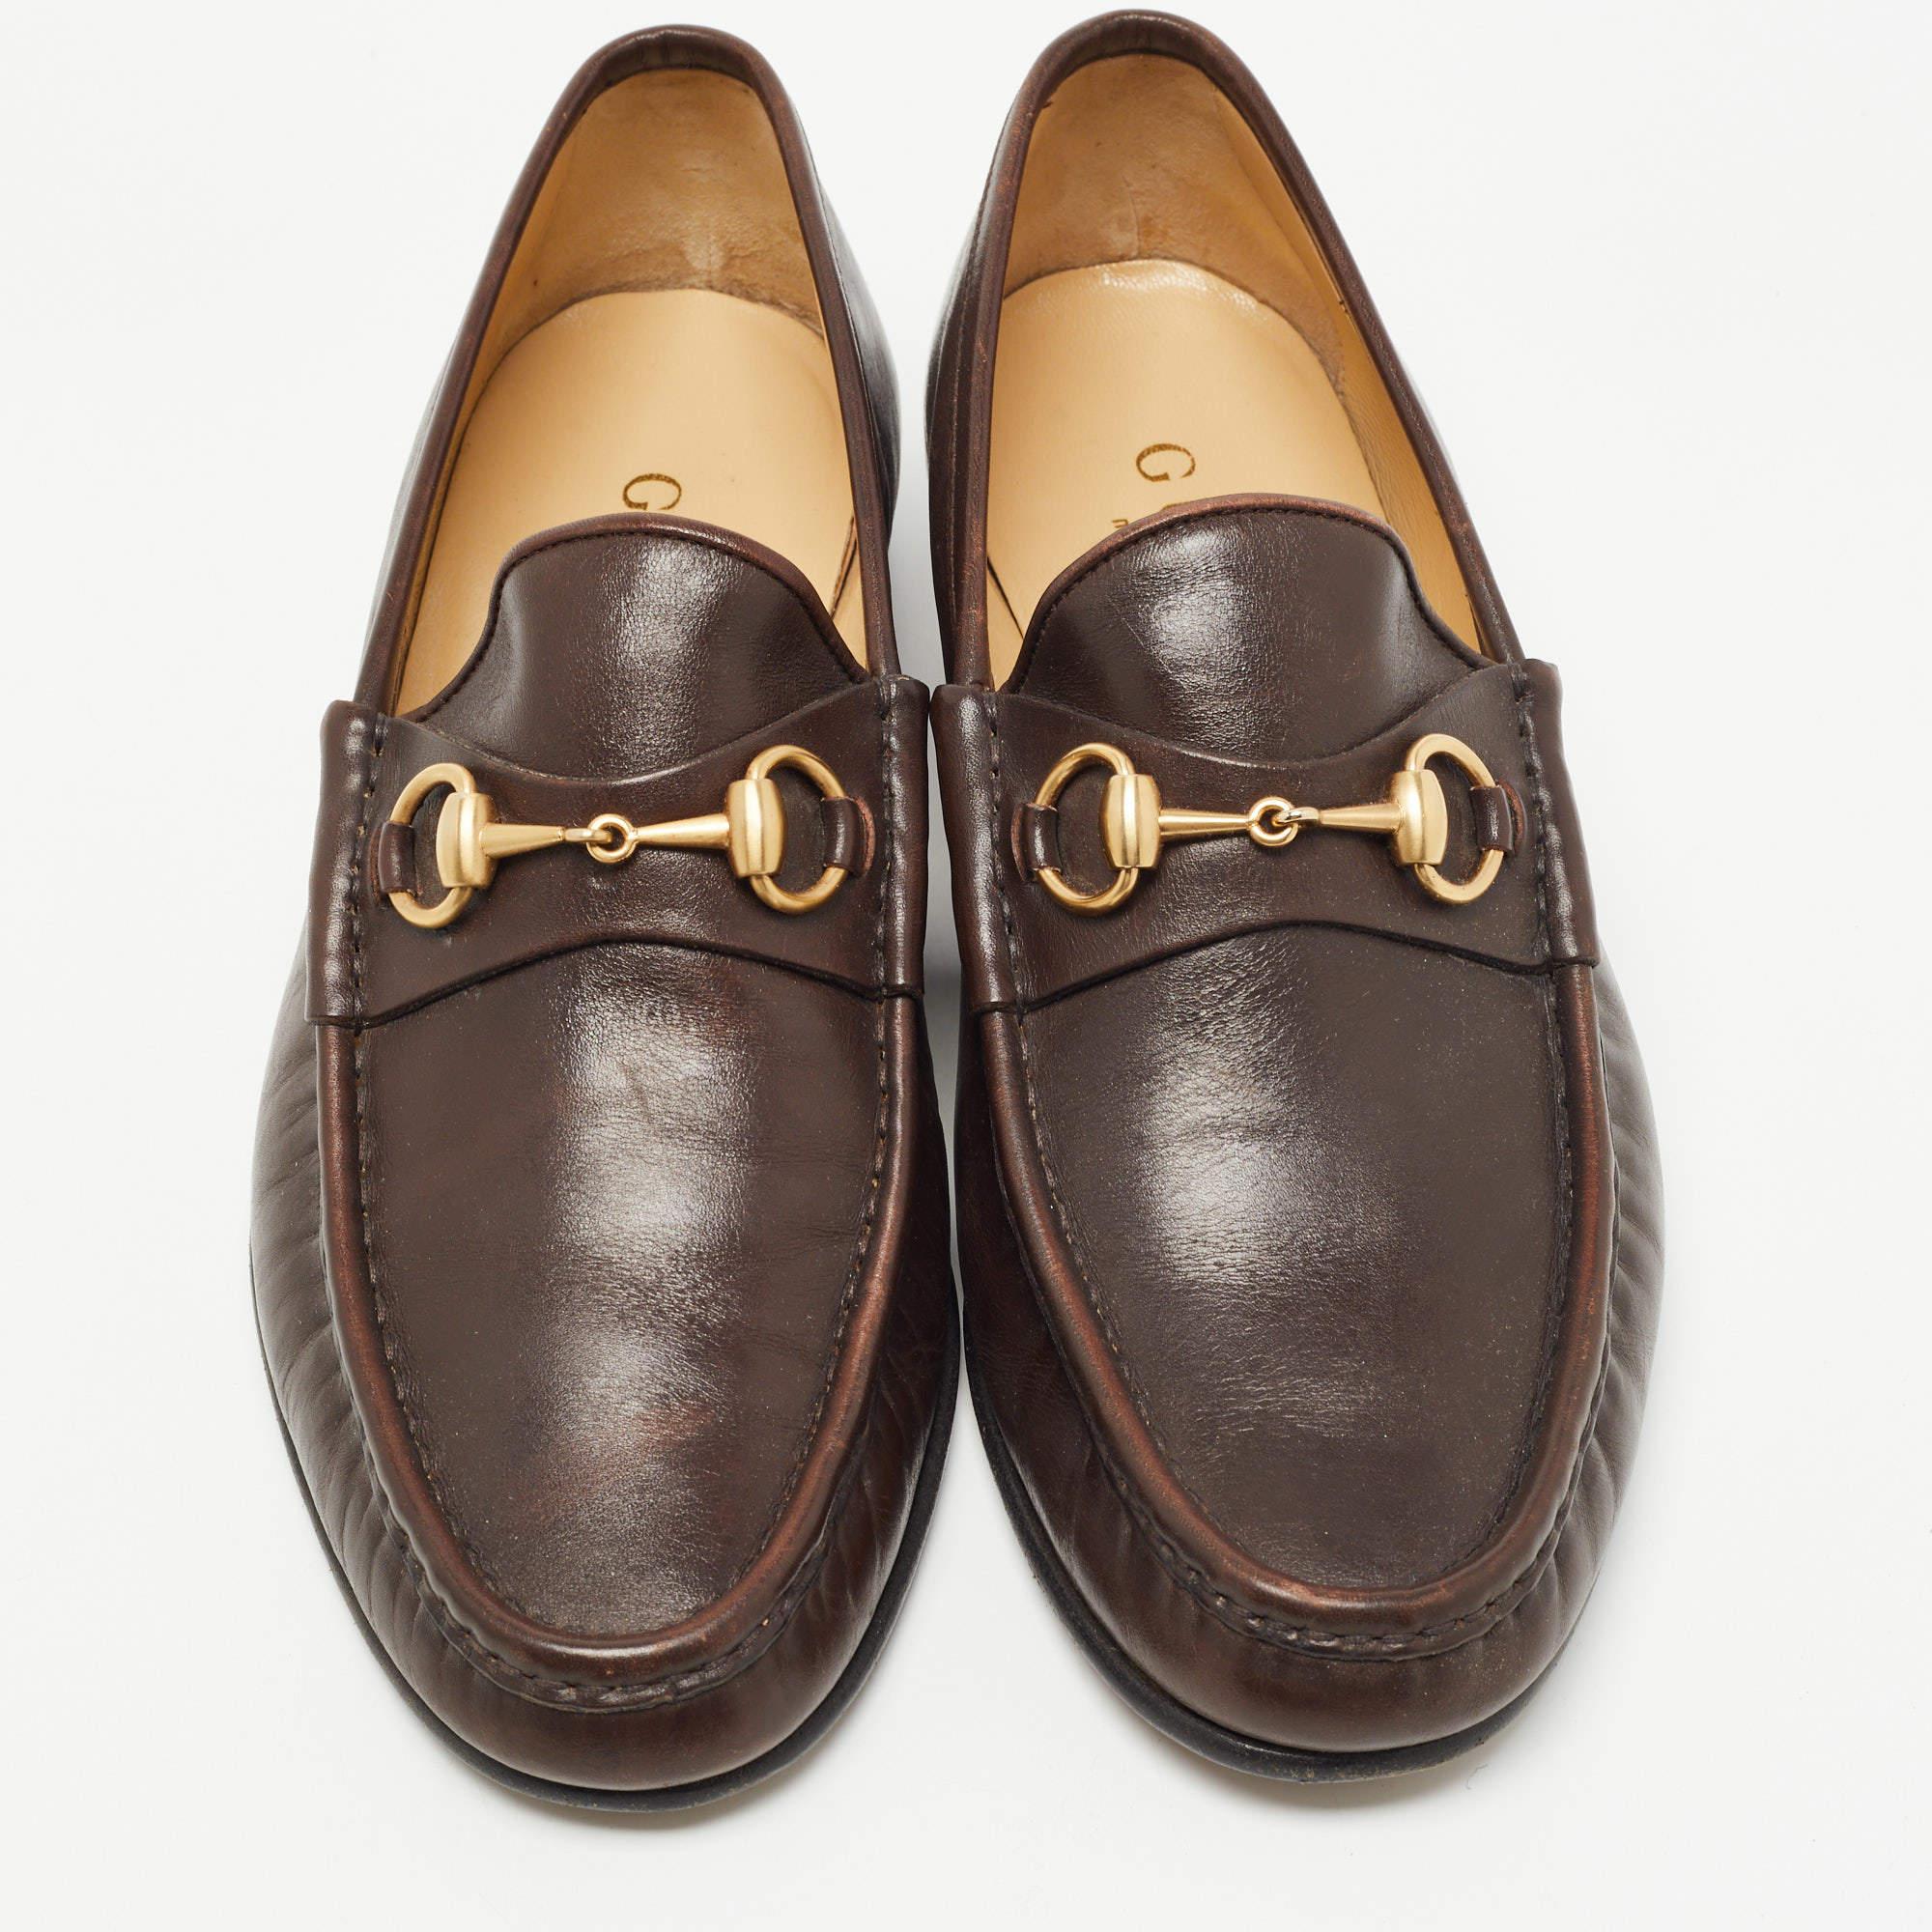 A classic addition to your outfit, these Gucci loafers are the epitome of sophistication and luxury. They are created from leather with a Horsebit motif on the upper, and the slip-on fitting lends the pair a practical finish.

Includes: Original